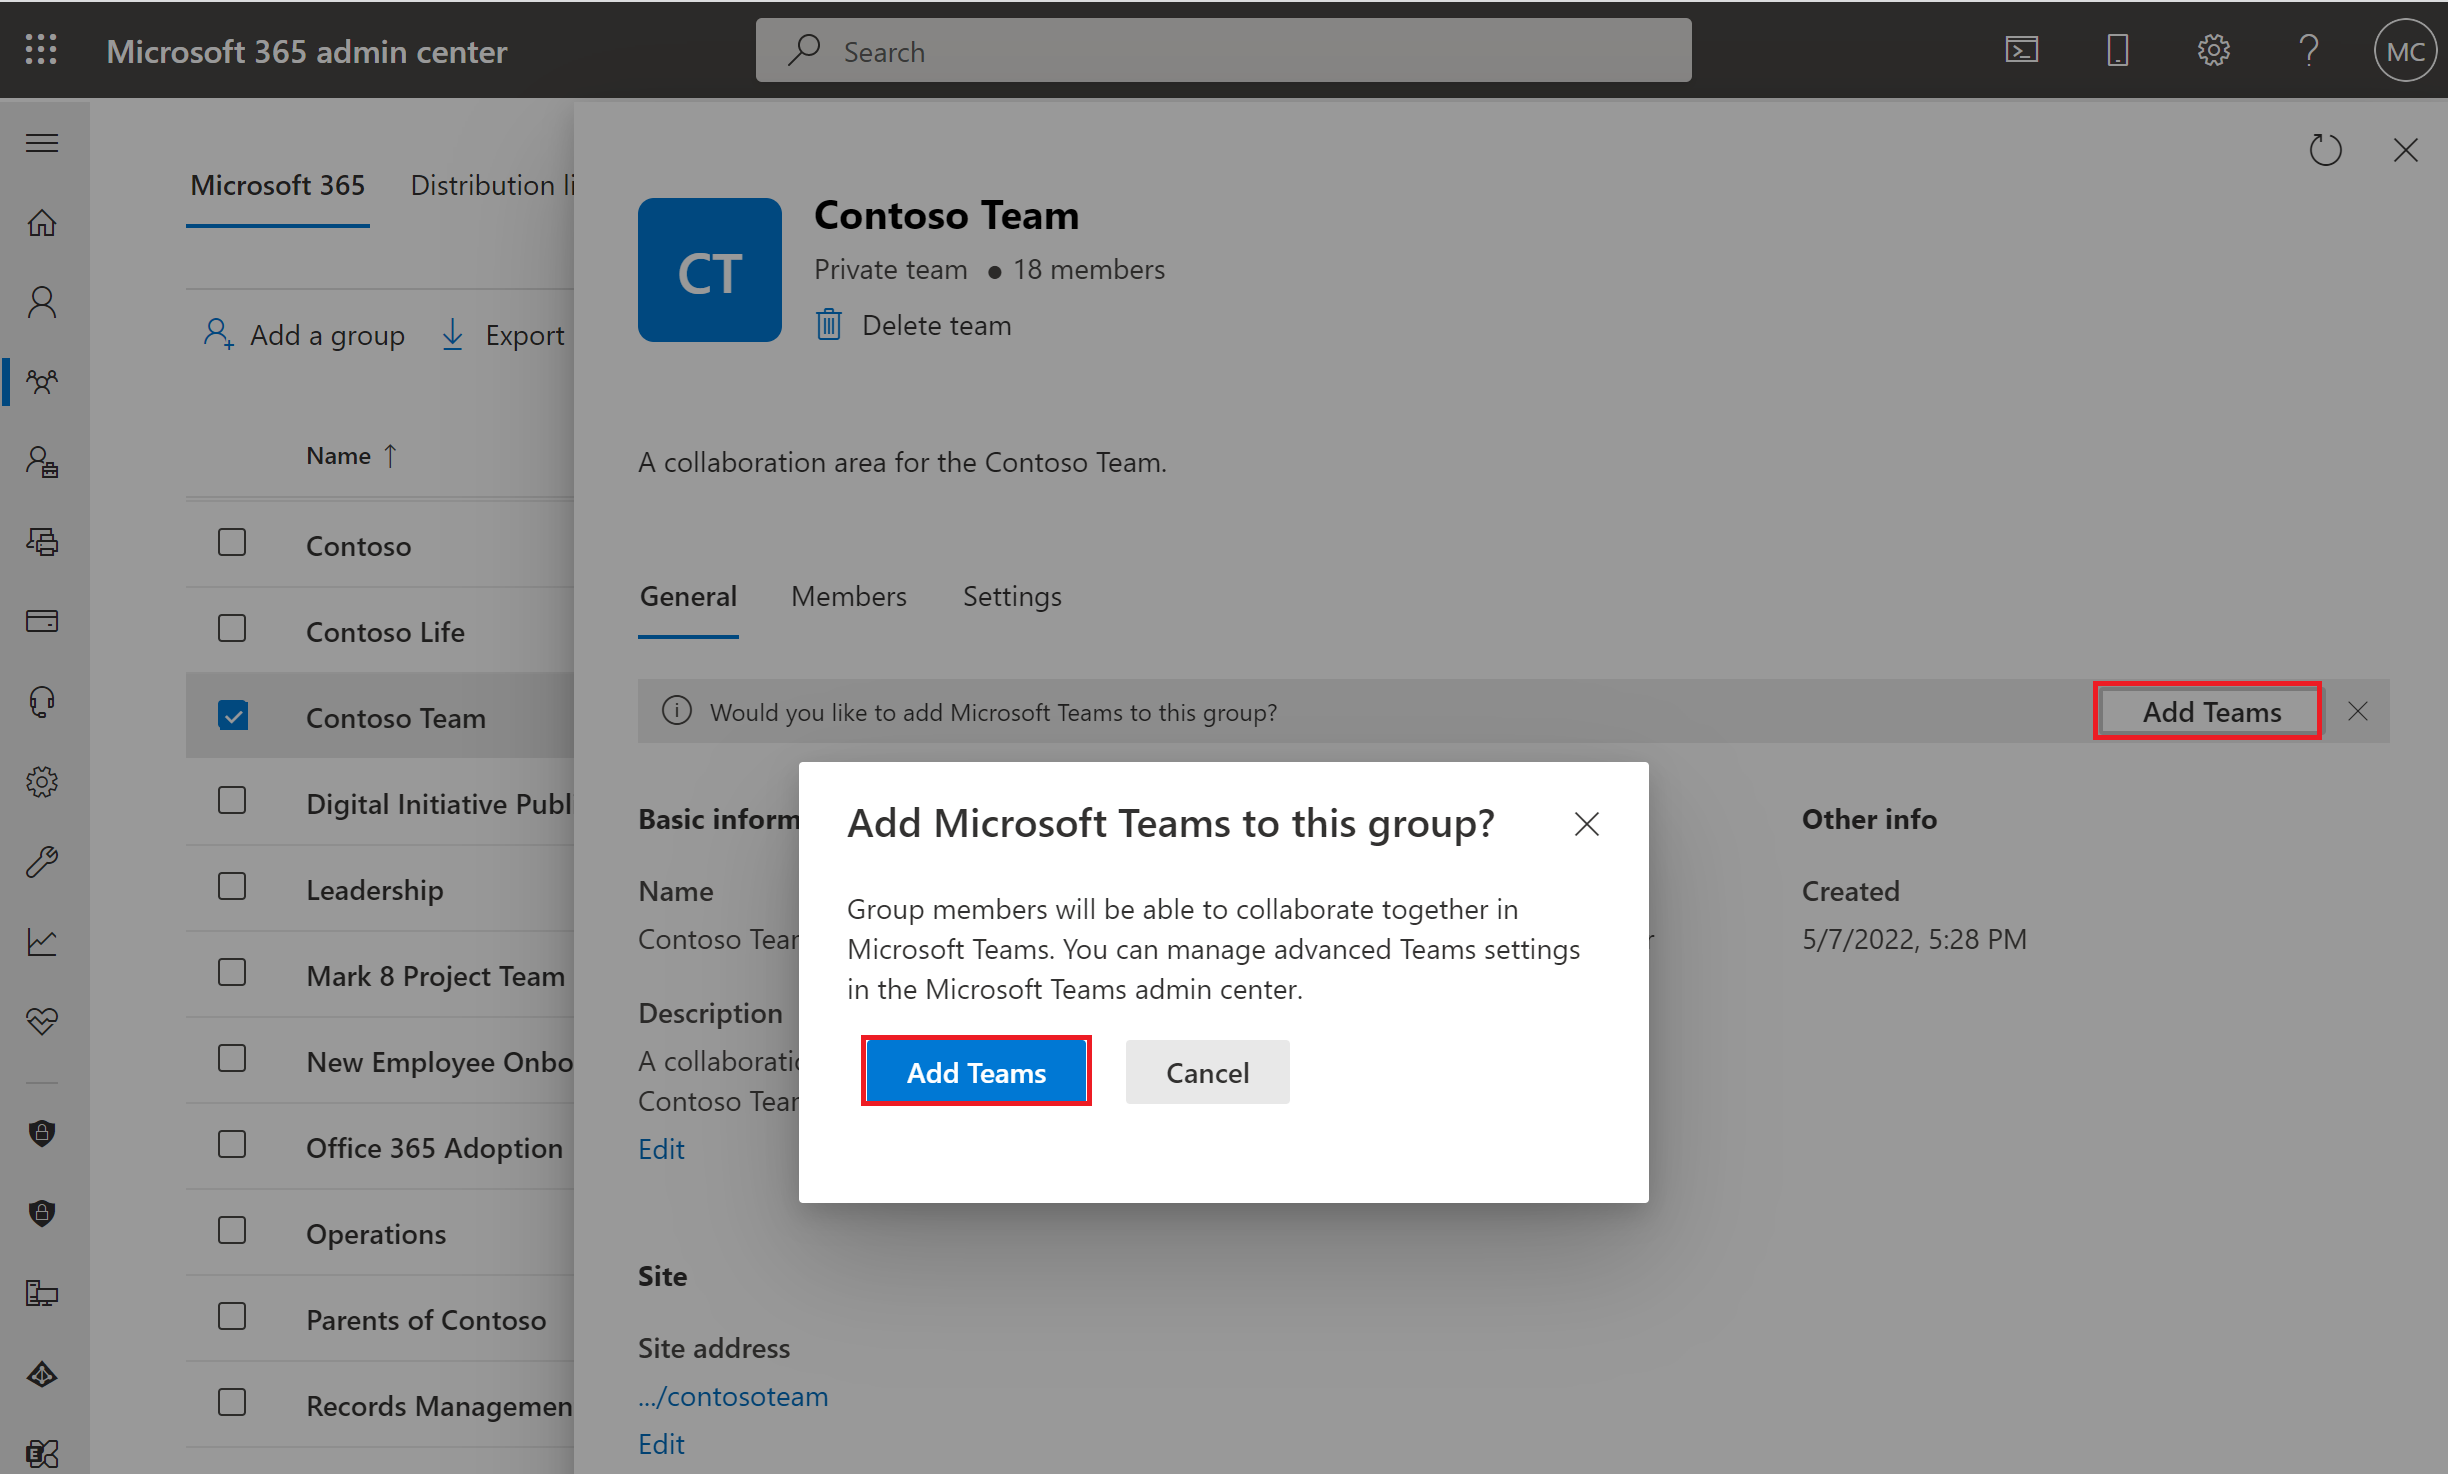 Screenshot of creating a team from Group selection in Microsoft 365 admin center.